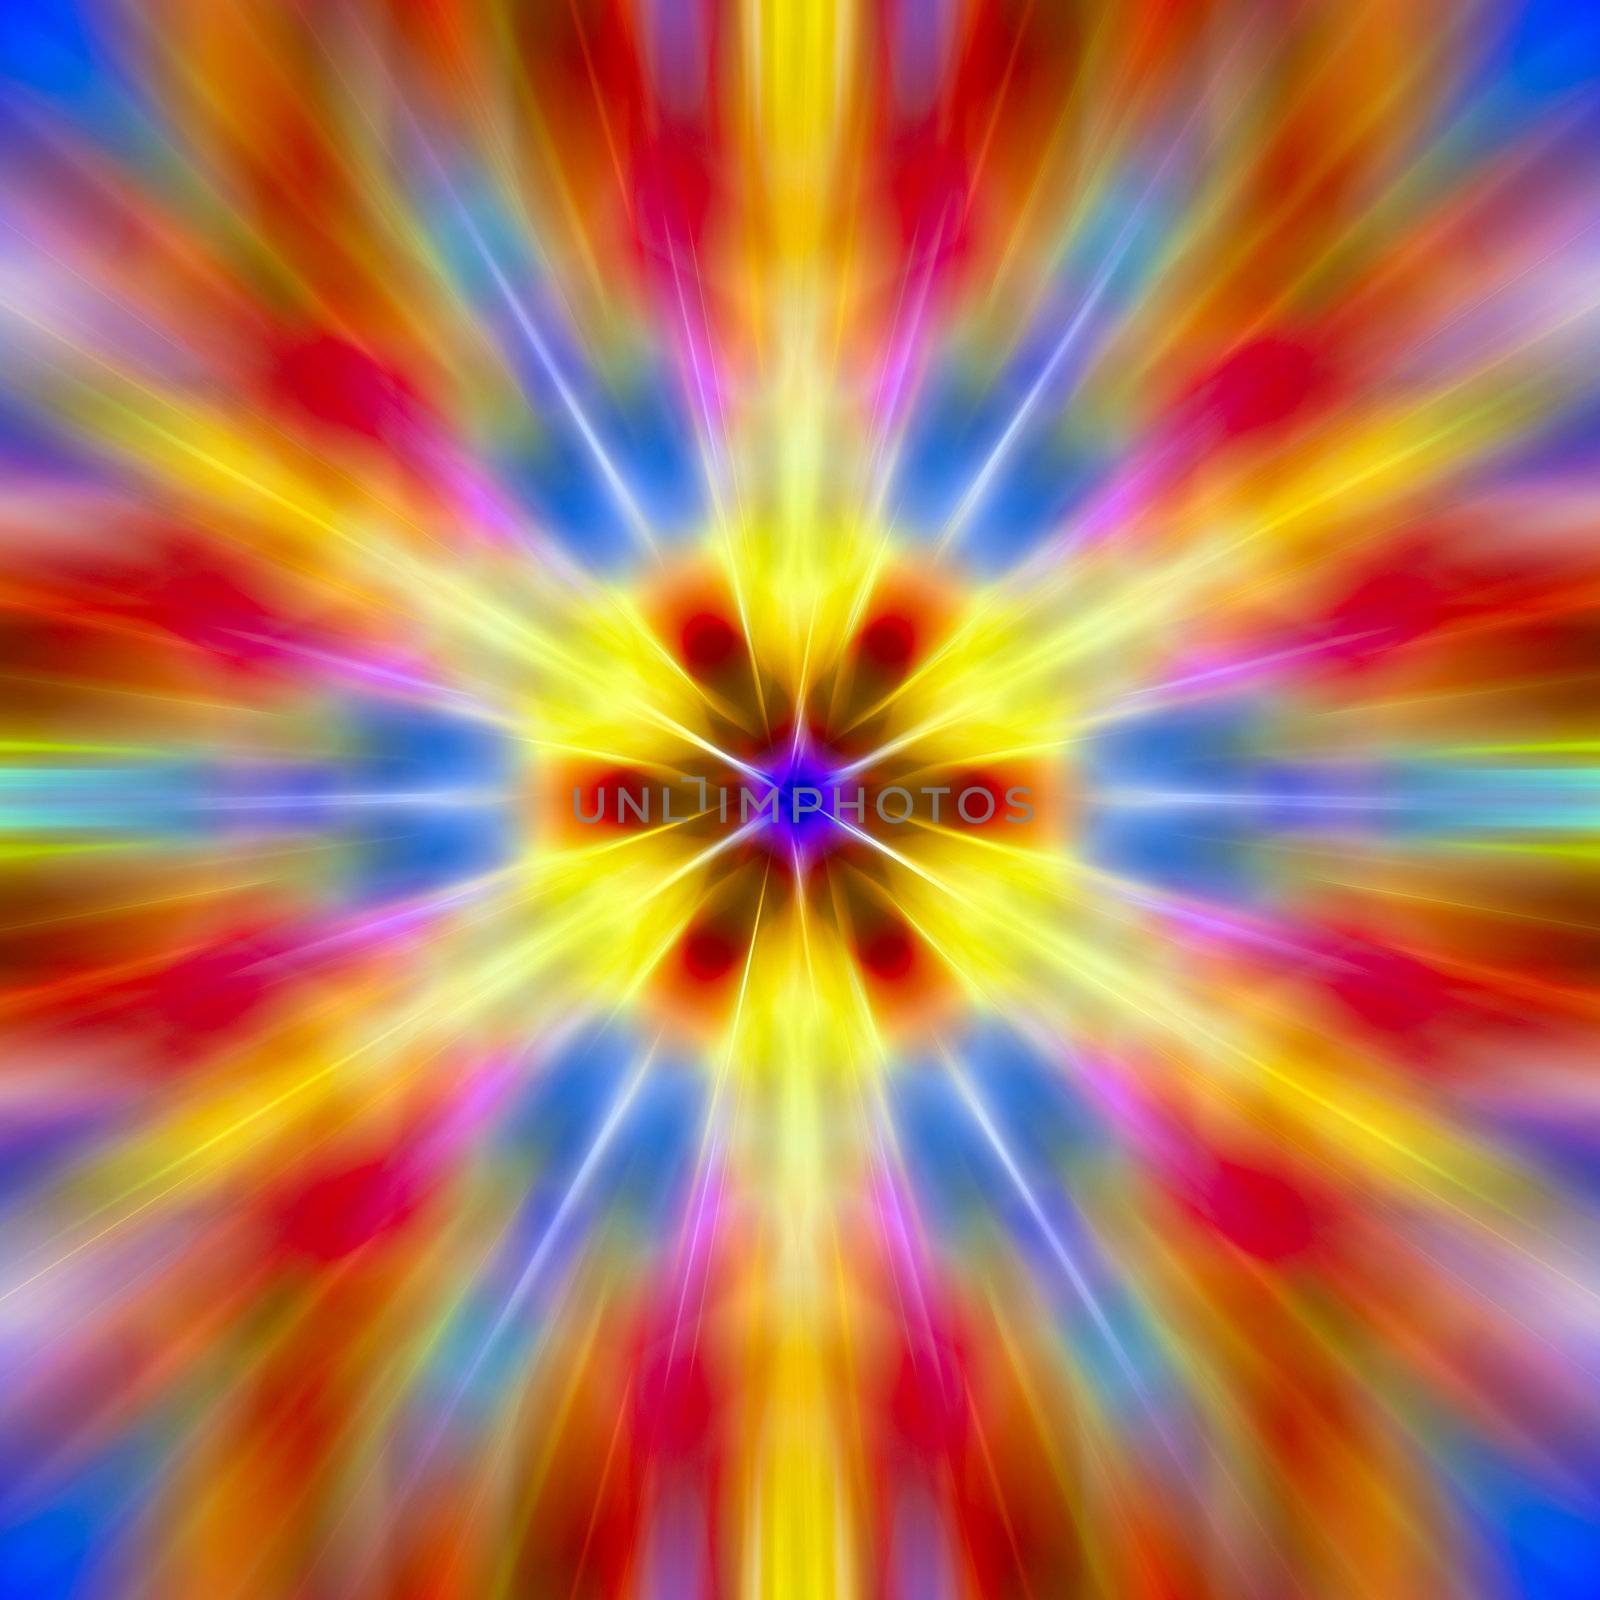 Star background in red, yellow and blue tones. High resolution abstract image
